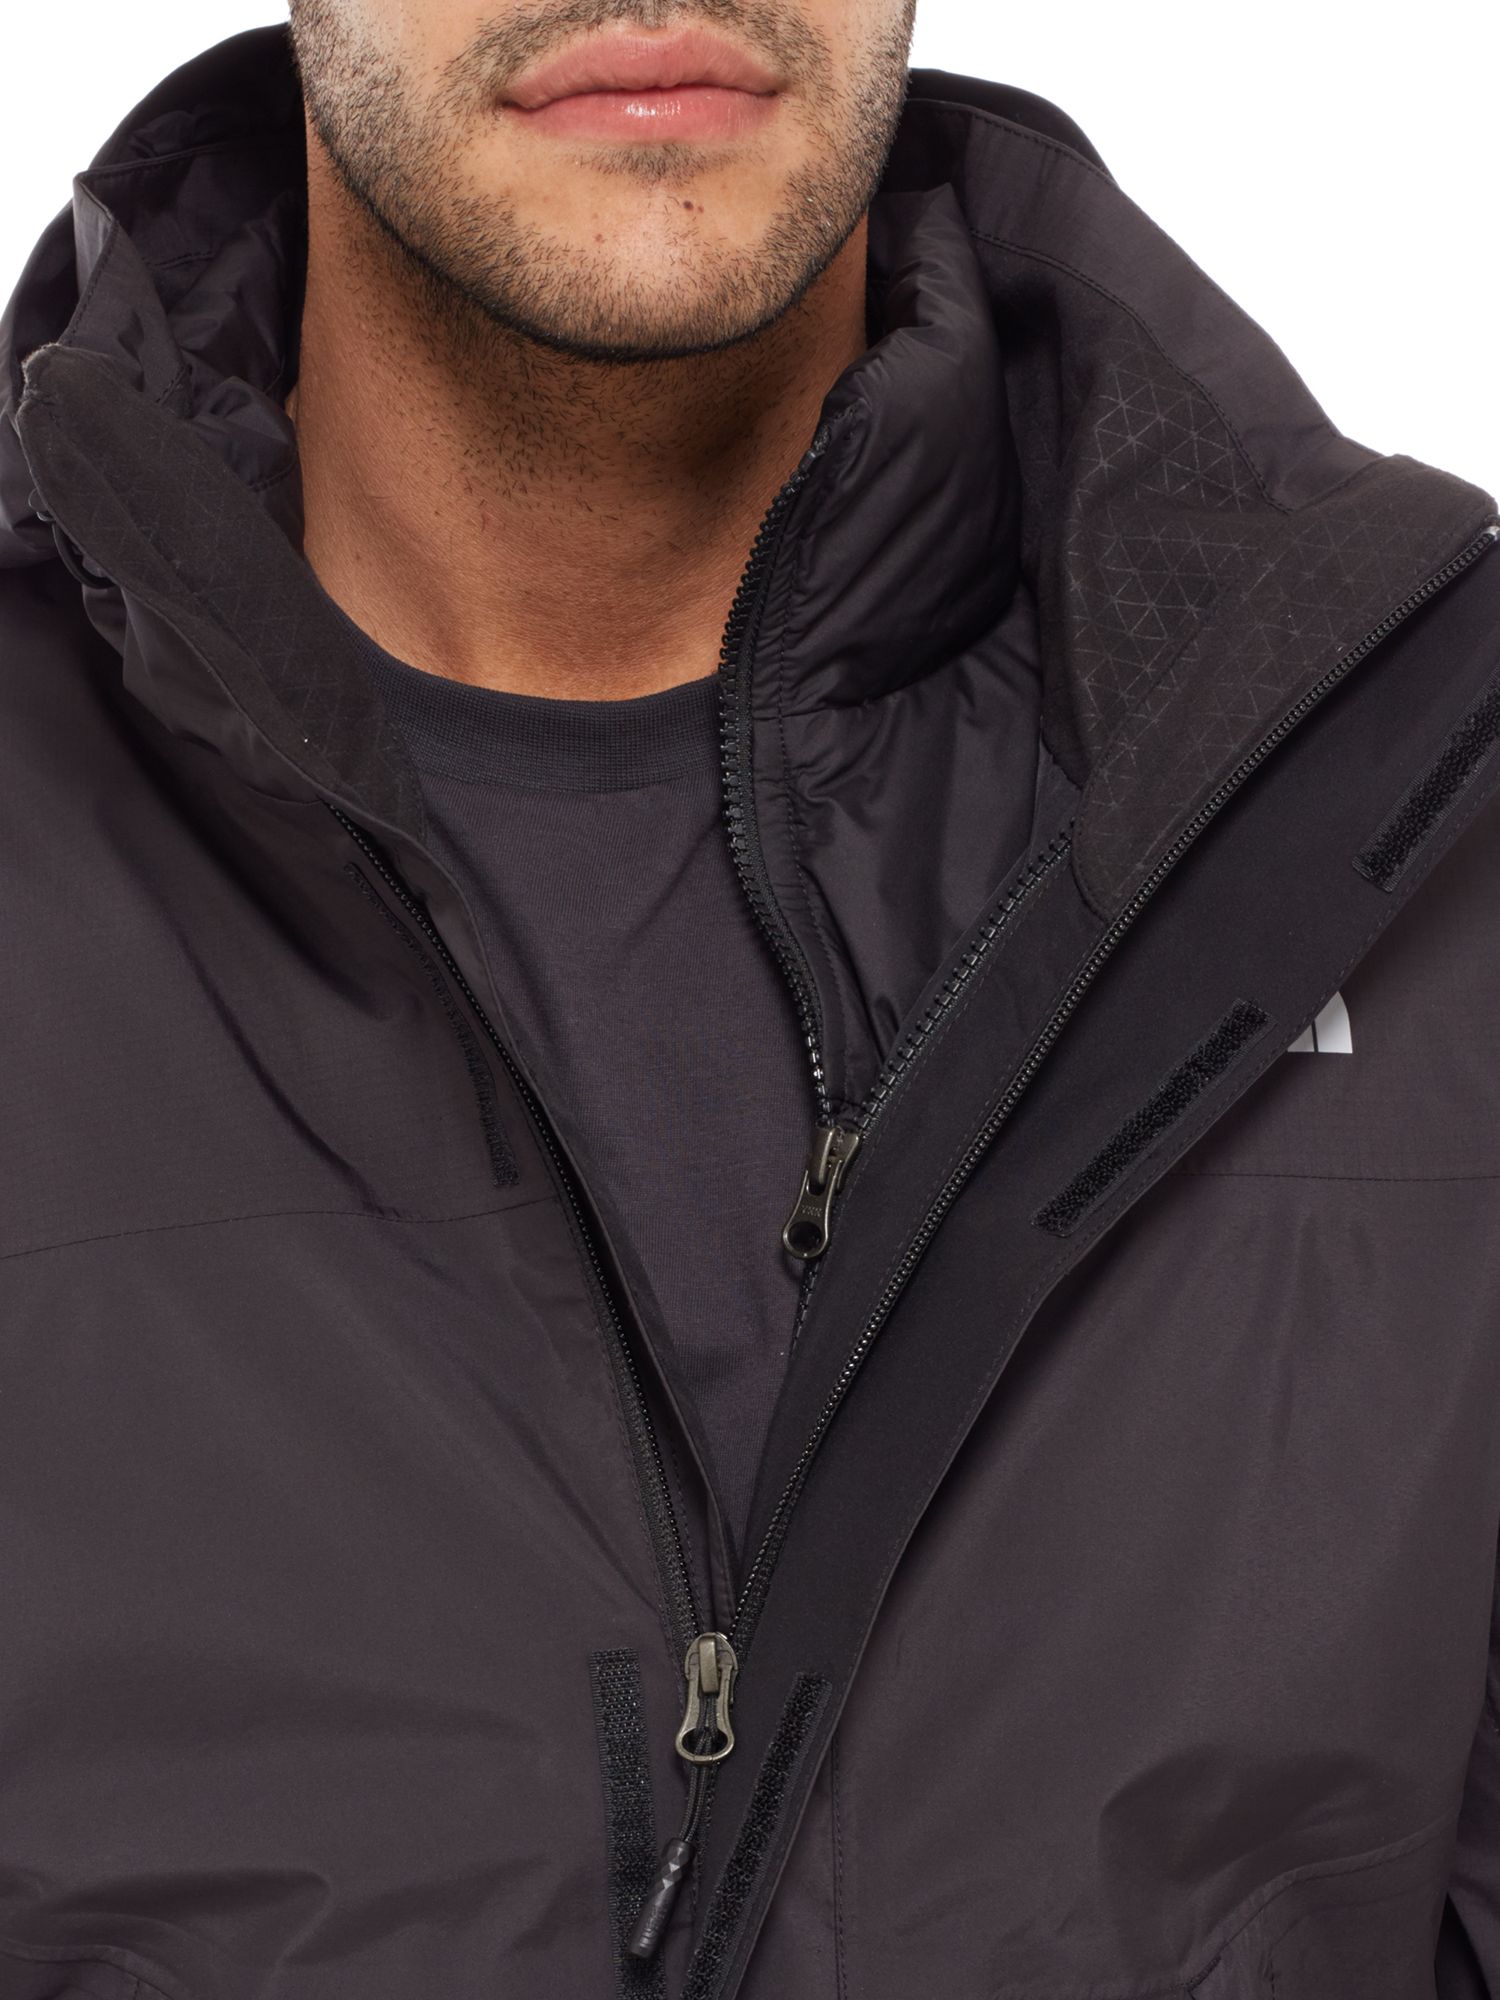 the north face light triclimate jacket